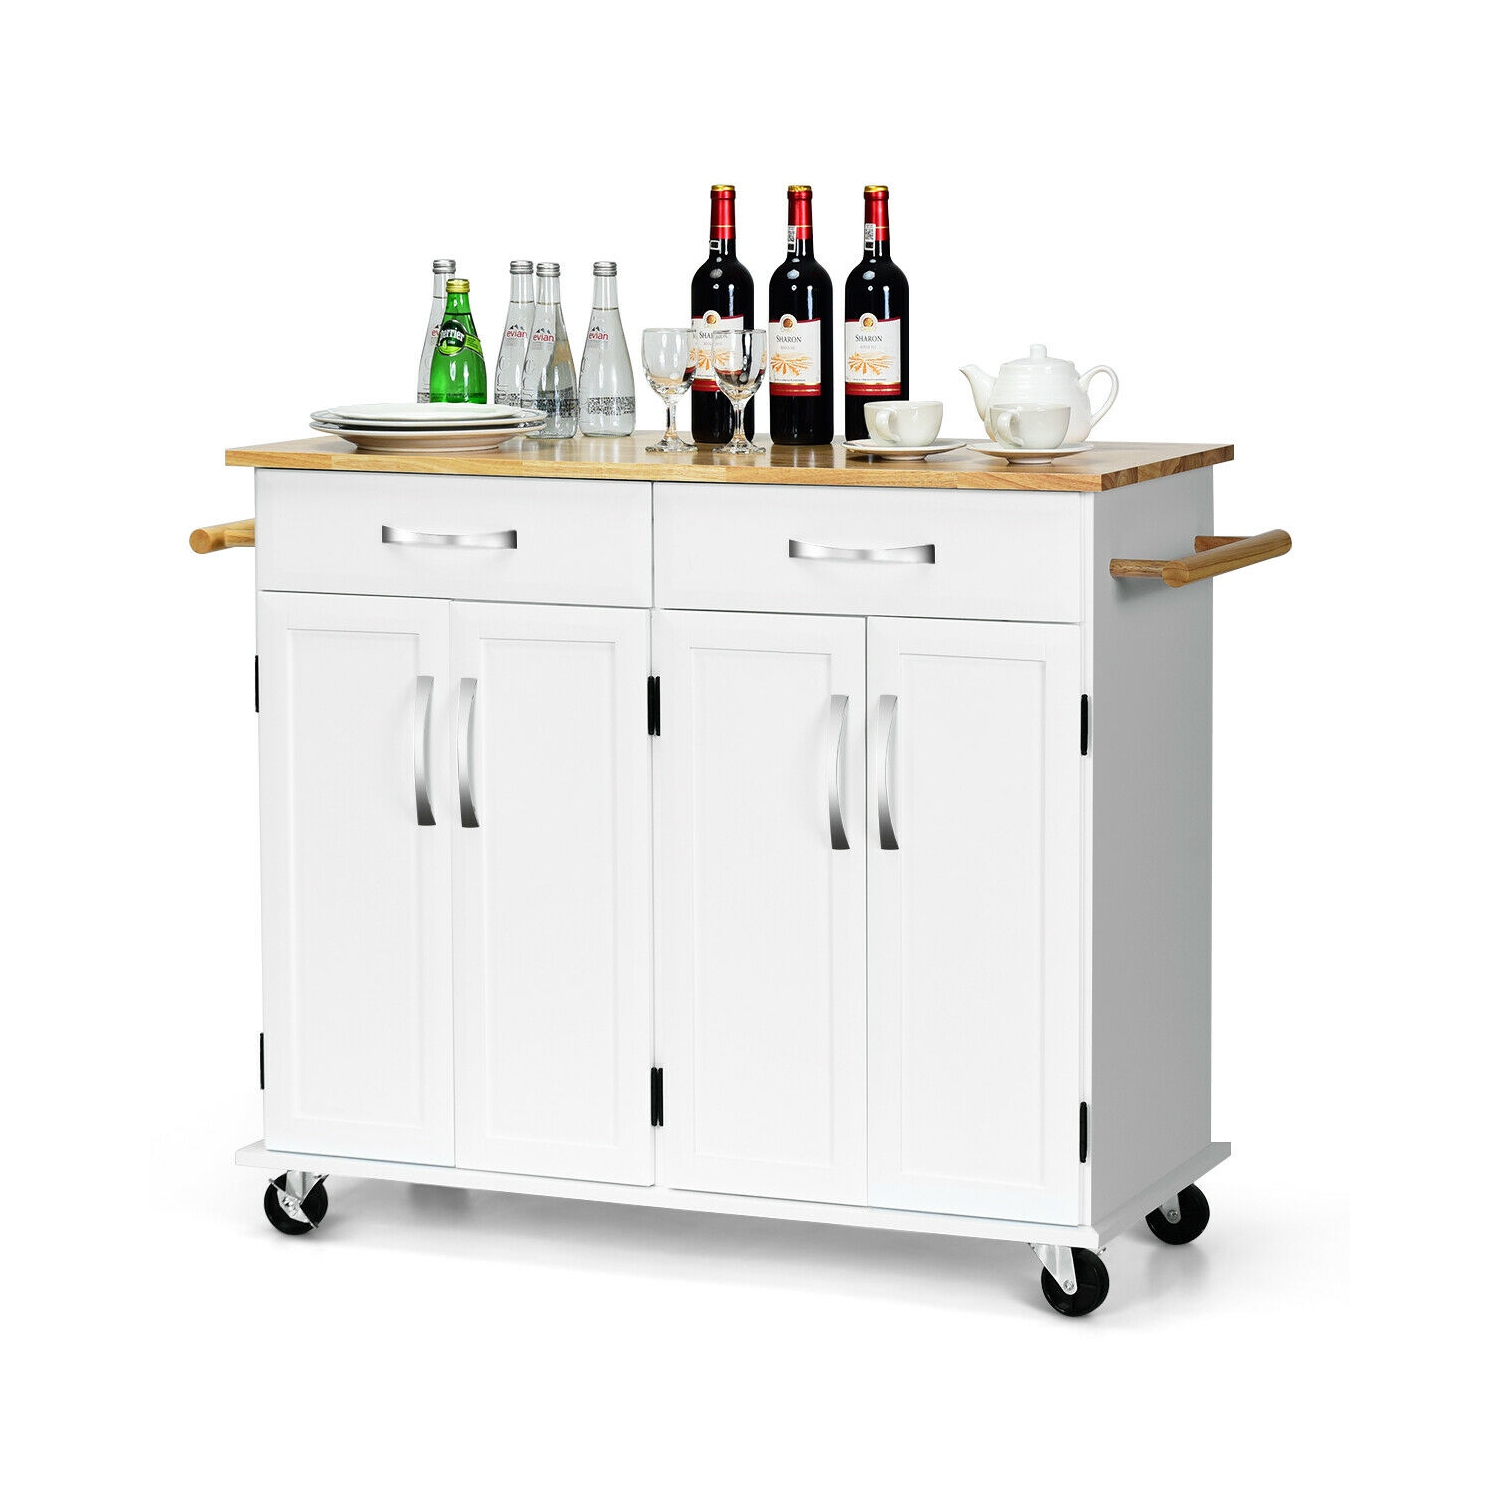 Costway Kitchen Trolley Island Utility Cart Wood Top Rolling Storage Cabinet Drawers